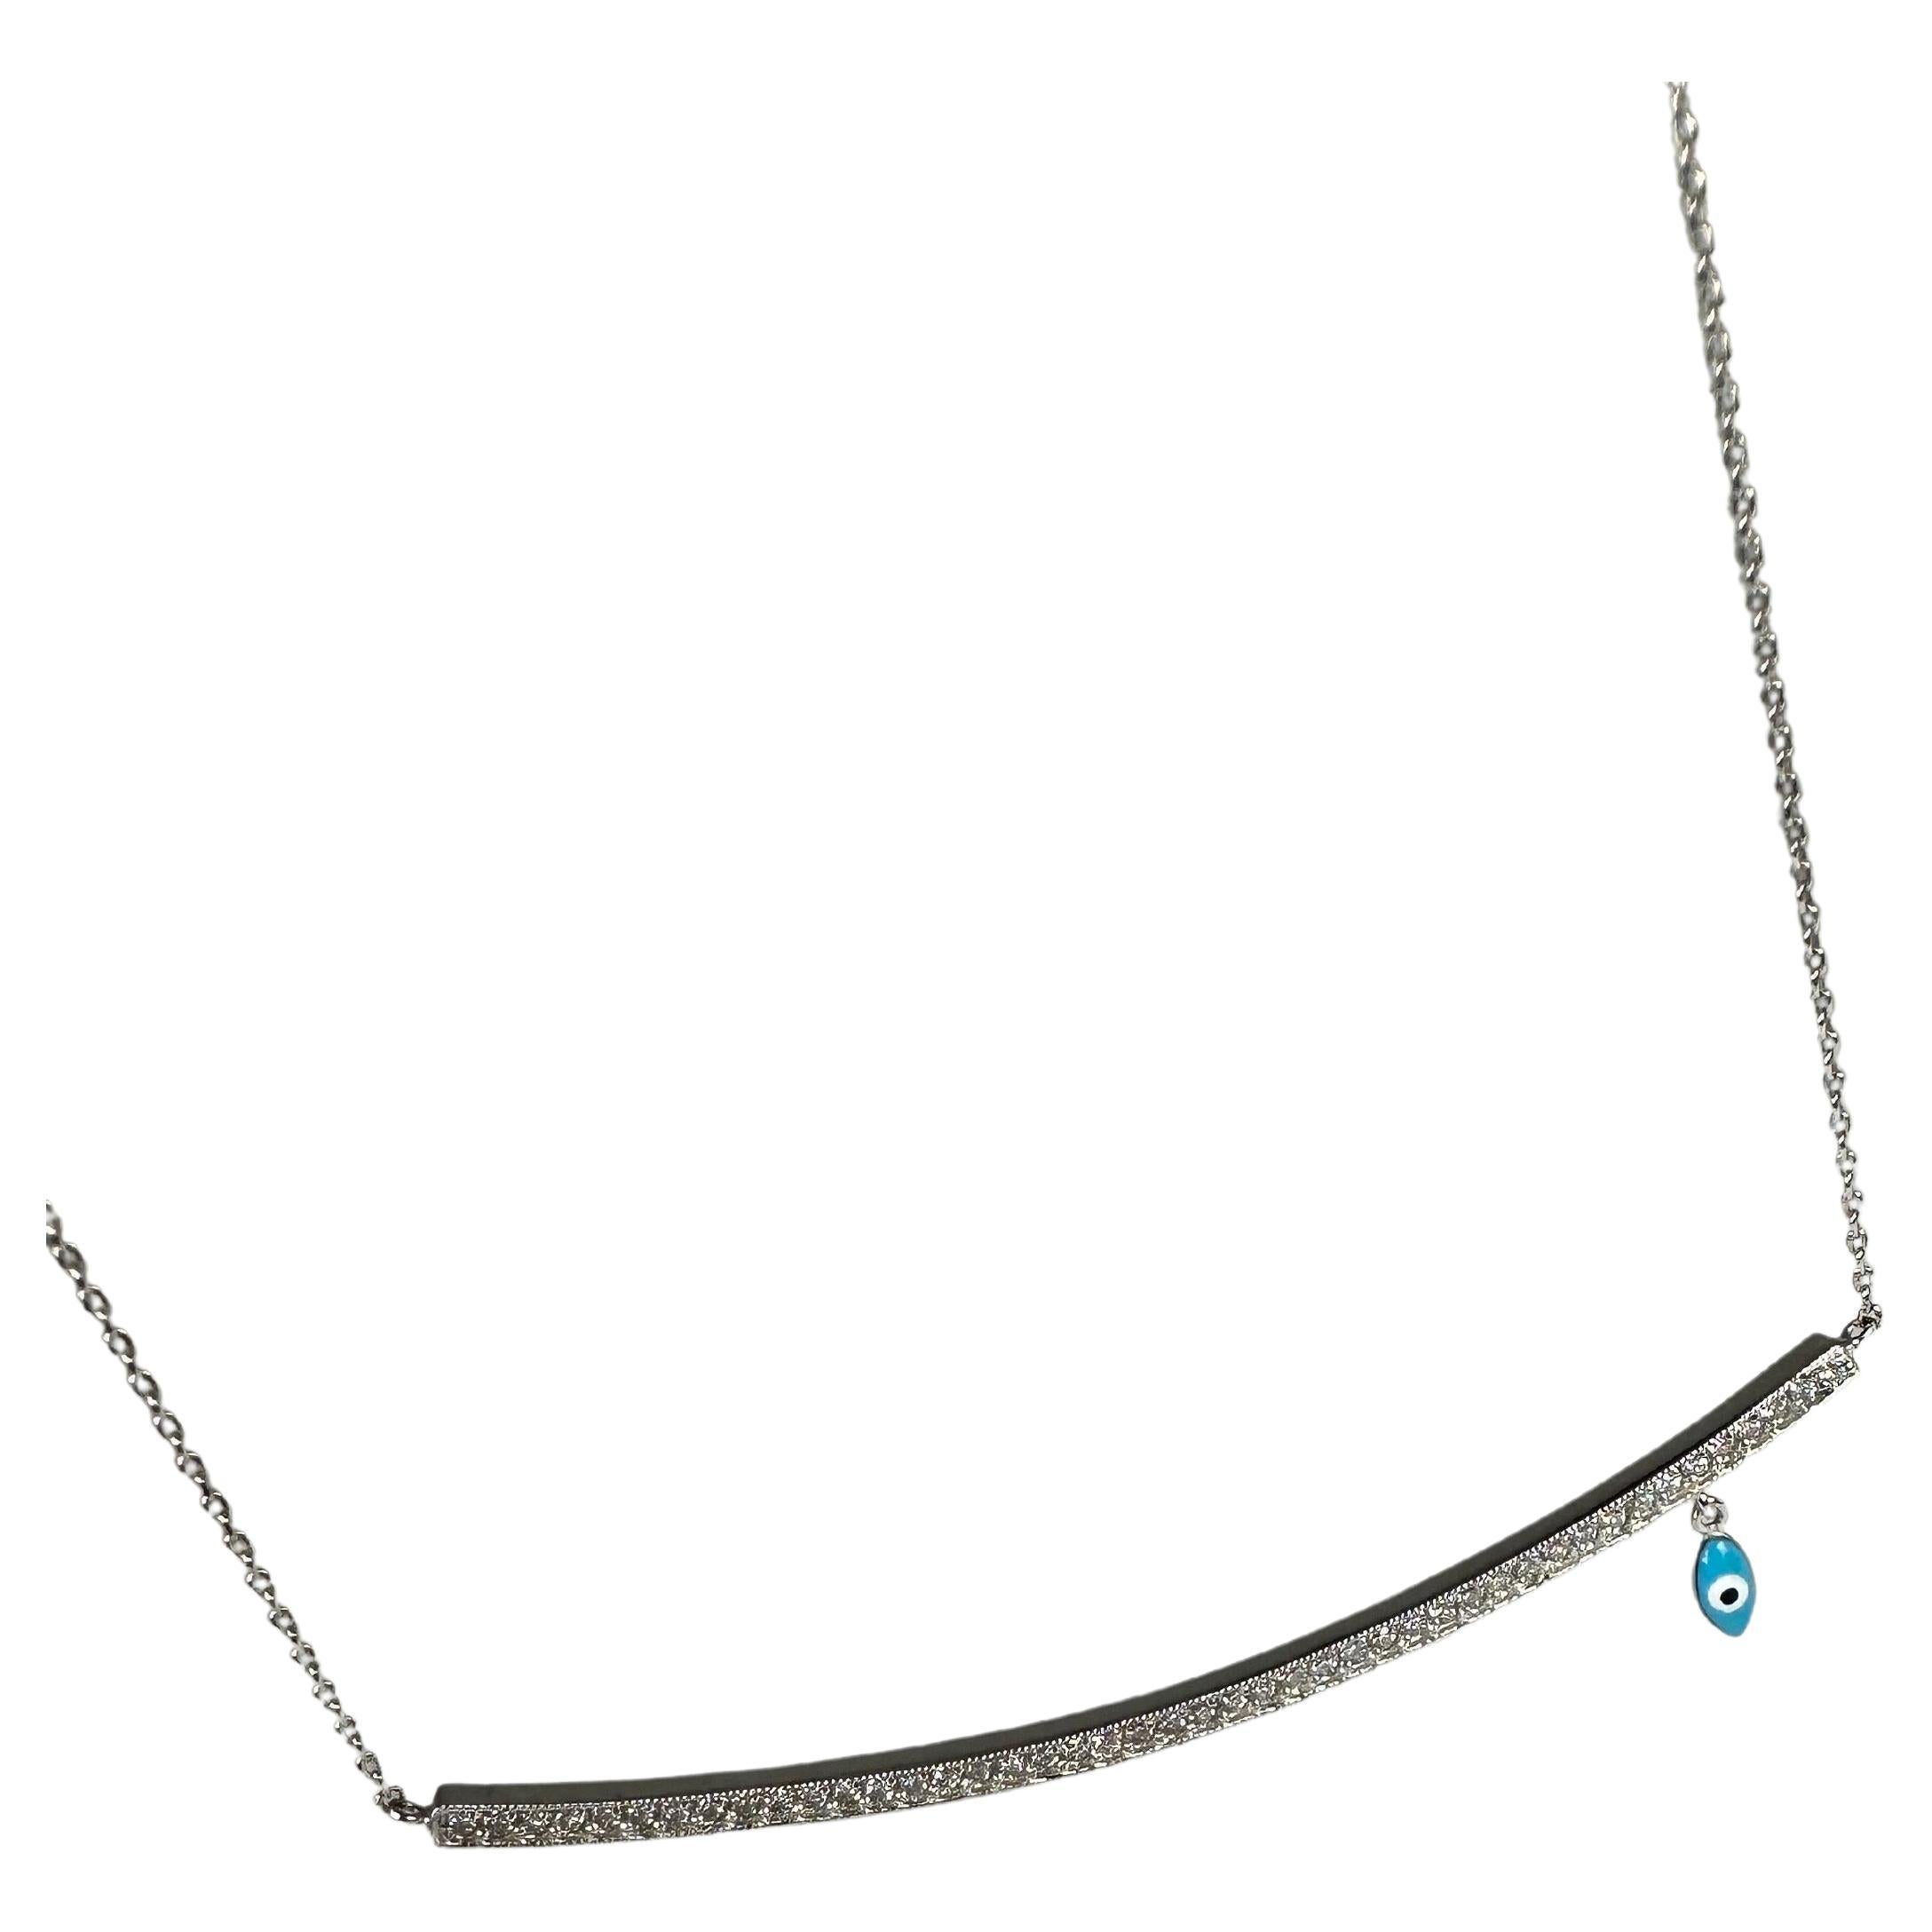 Diamond necklace in 18KT white gold with evil eye symbol, well crafted bar diamond pendant necklace.
GOLD: 18KT gold
NATURAL DIAMOND(S)
Clarity/Color: VS/G
Carat:0.31ct
Grams:3.40
size: 18 inches chain
Item#: 165-00066 PIK

WHAT YOU GET AT STAMPAR